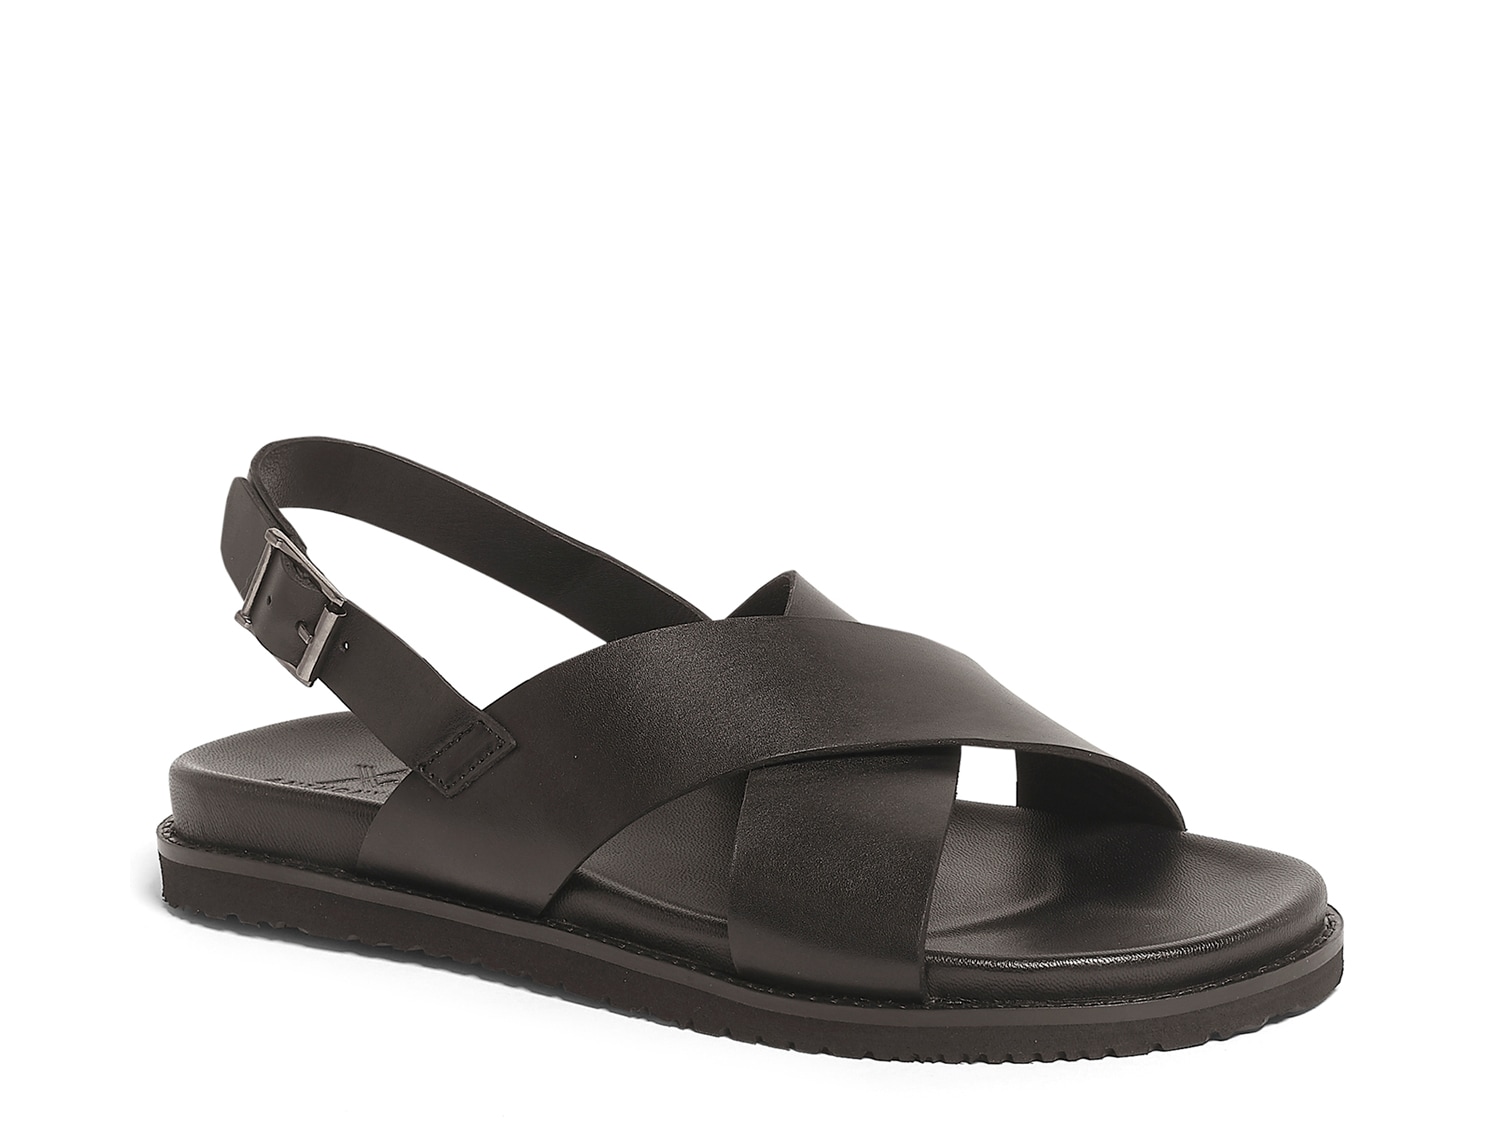 Anthony Veer Cancun Sandal - Free Shipping | DSW